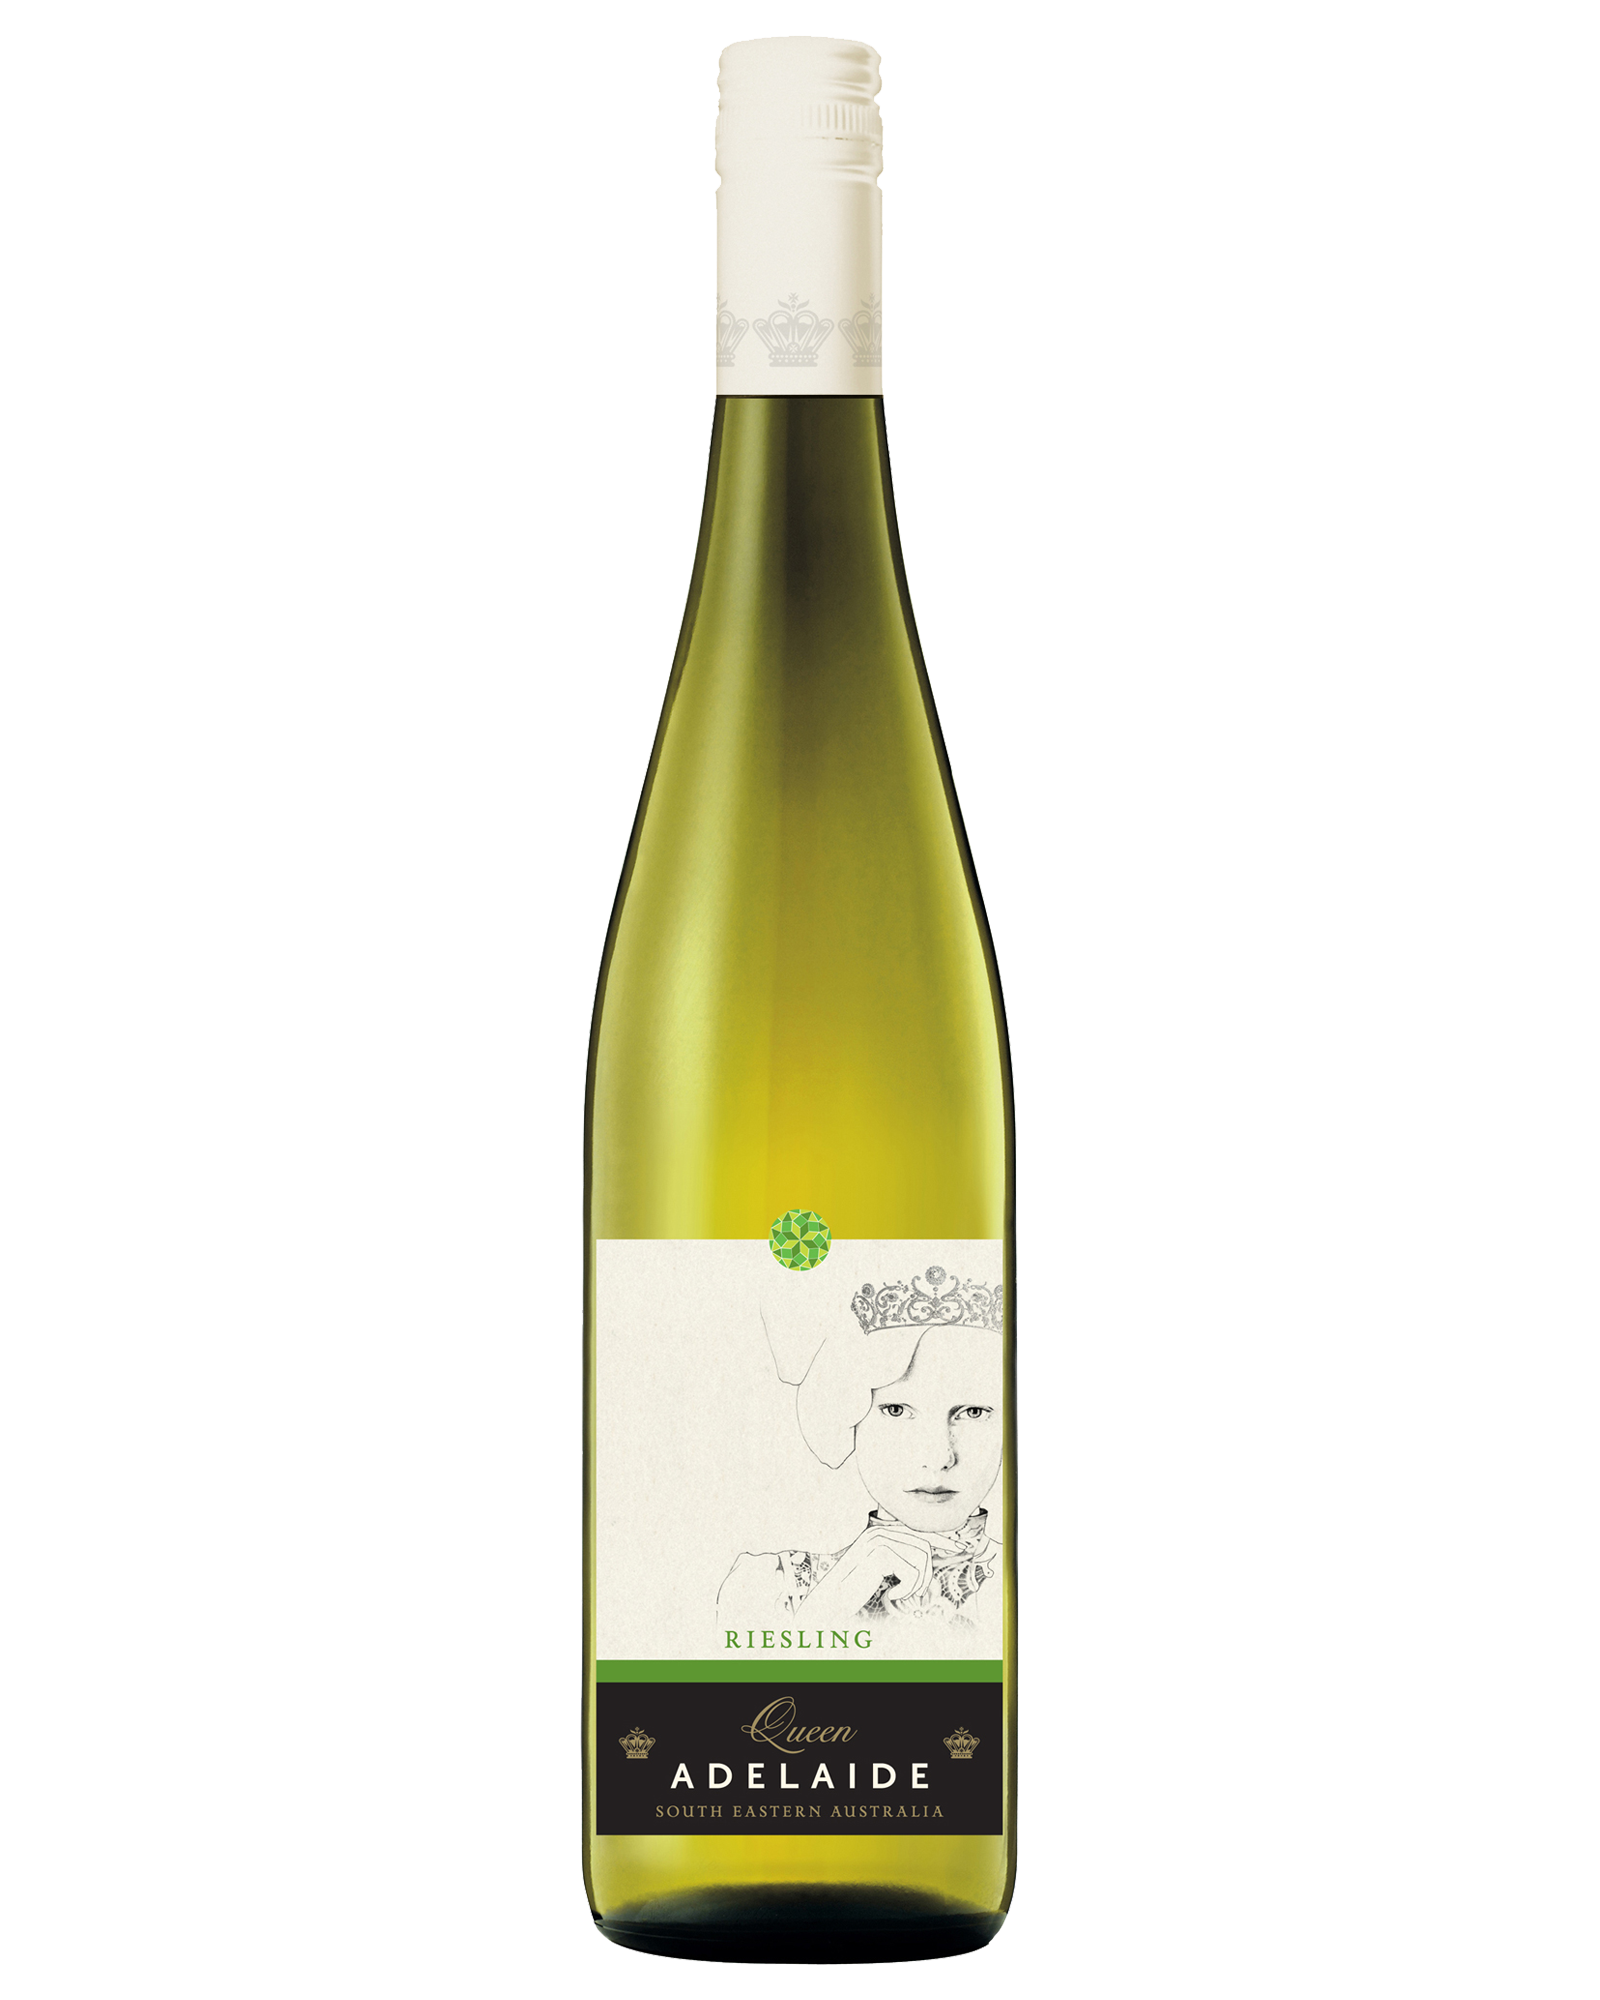 Queen Adelaide Dry Riesling